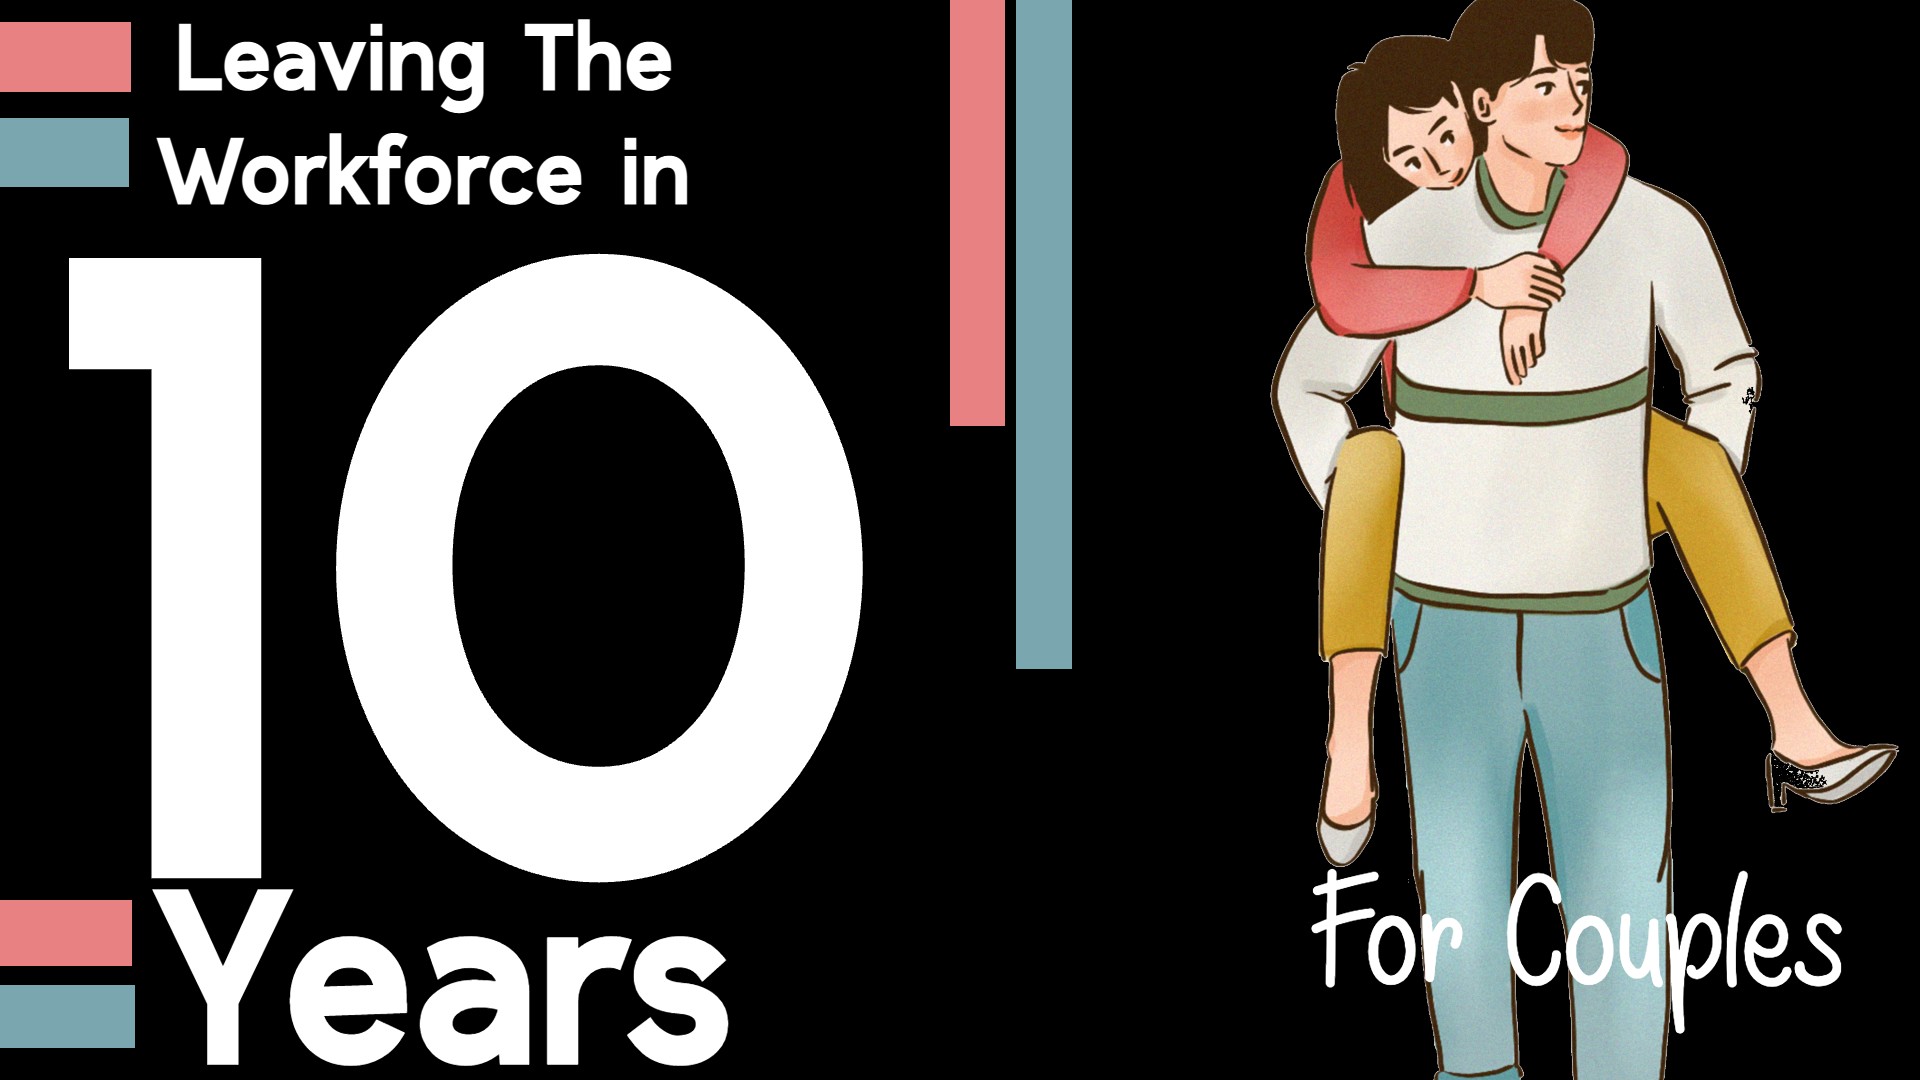 Leaving in the Workforce in 10 Years- Couples